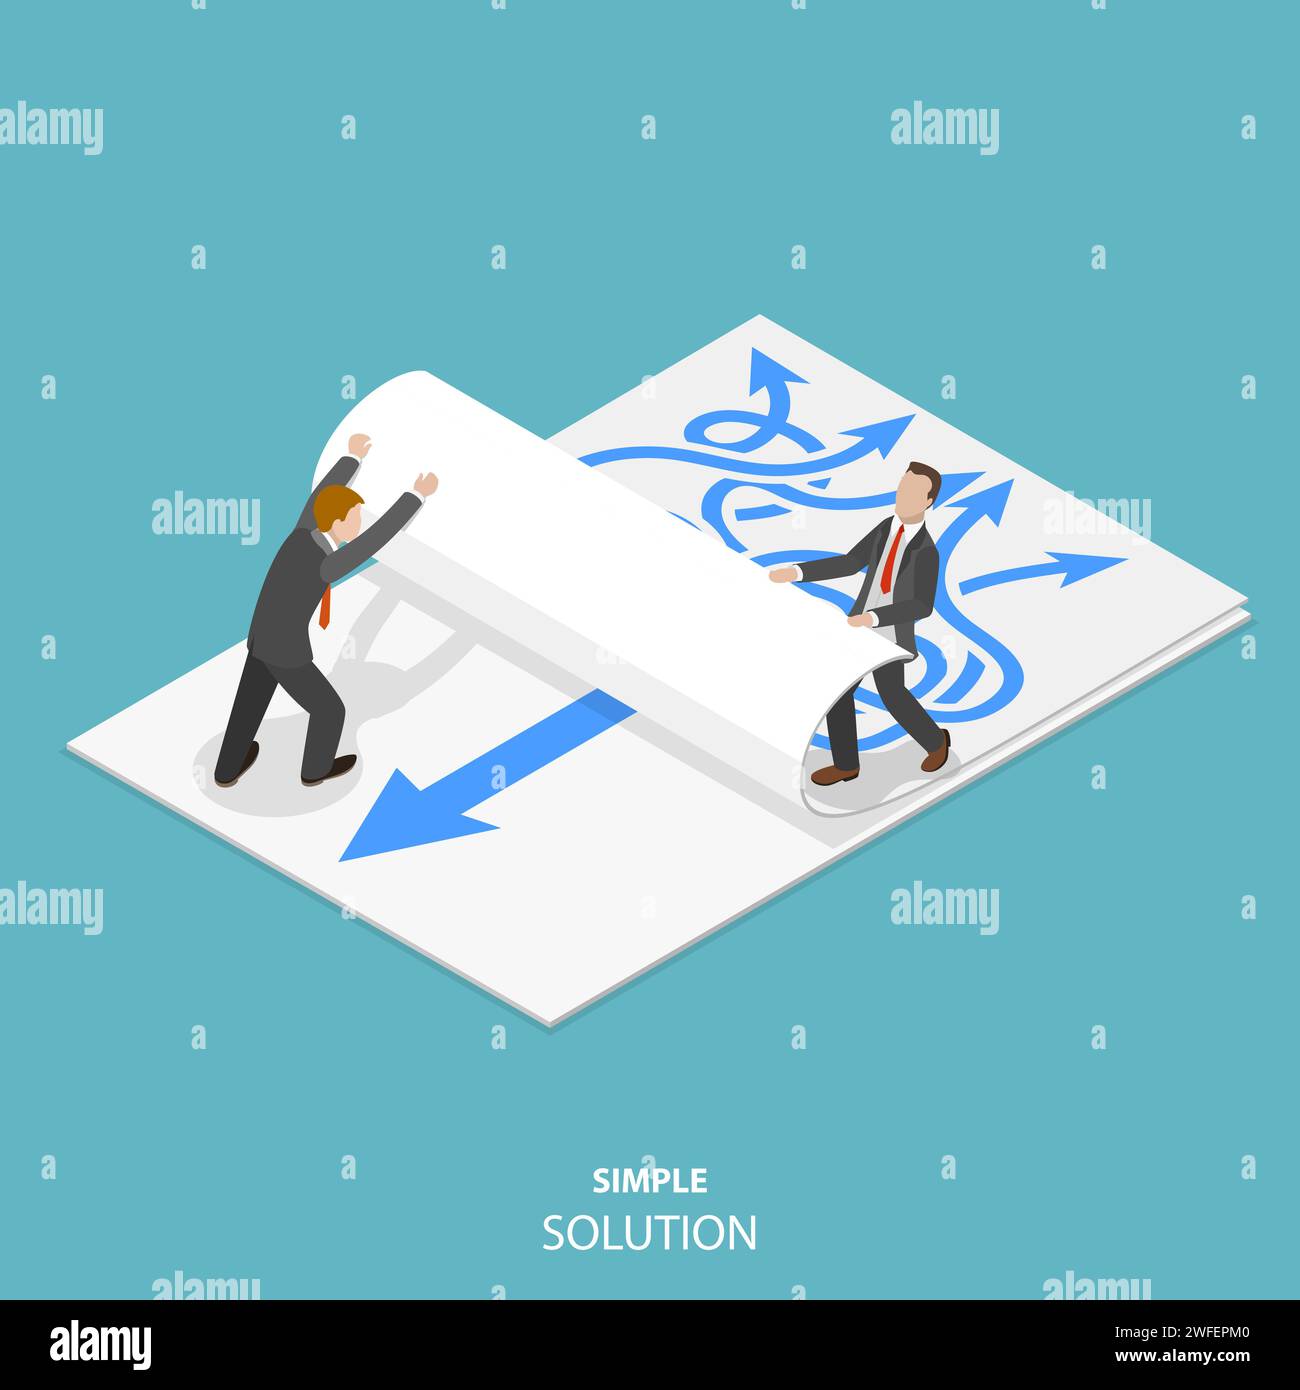 Simple solution flat isometric vector concept. Two man are taking away a paper sheet with many curved arrows to different directions on it to clear a Stock Vector